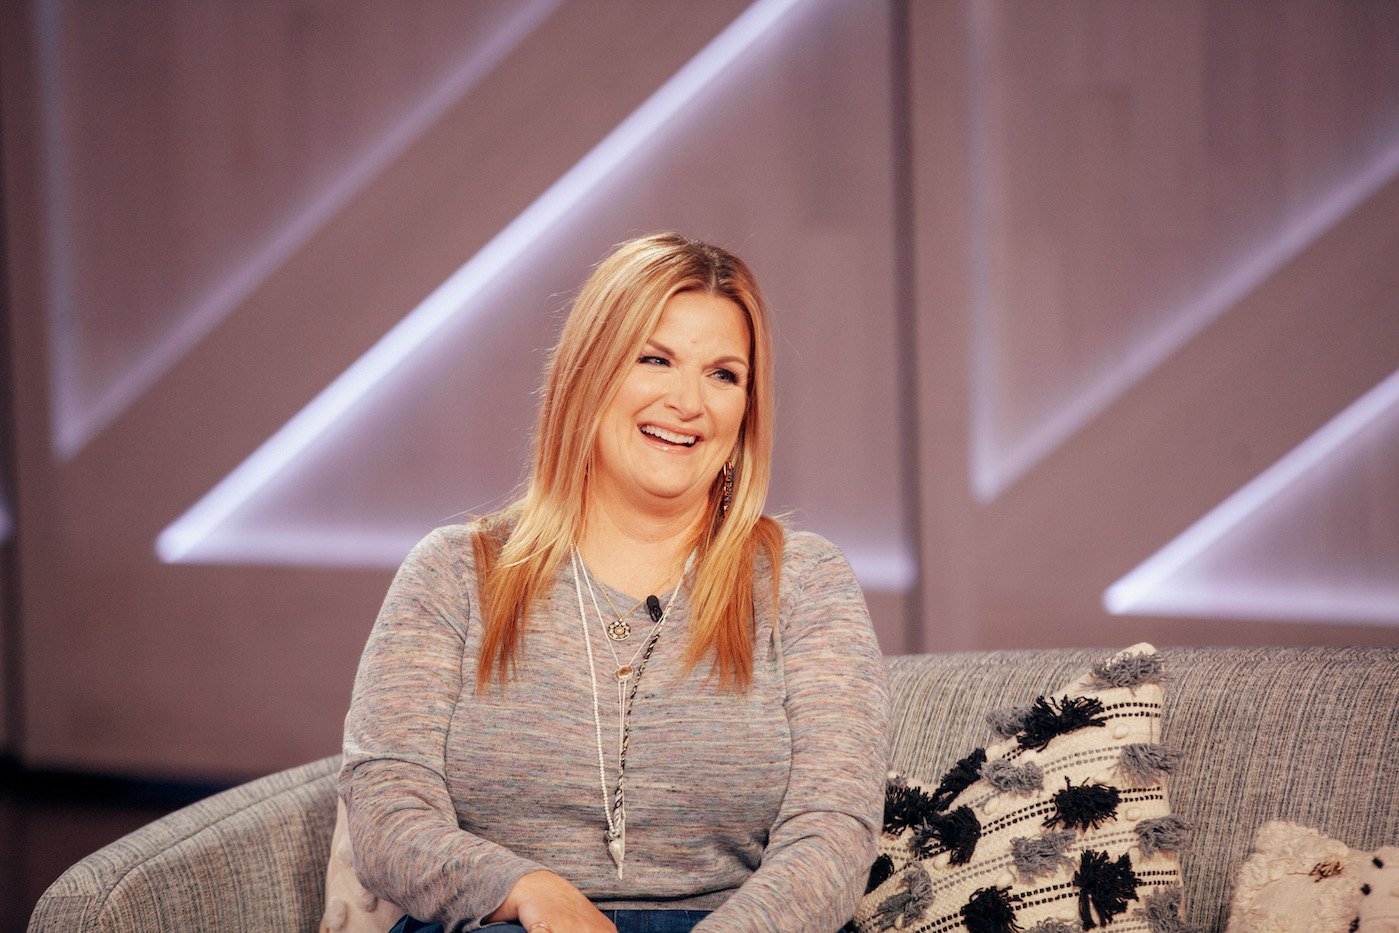 Trisha Yearwood smiles as she sits on a couch and looks on